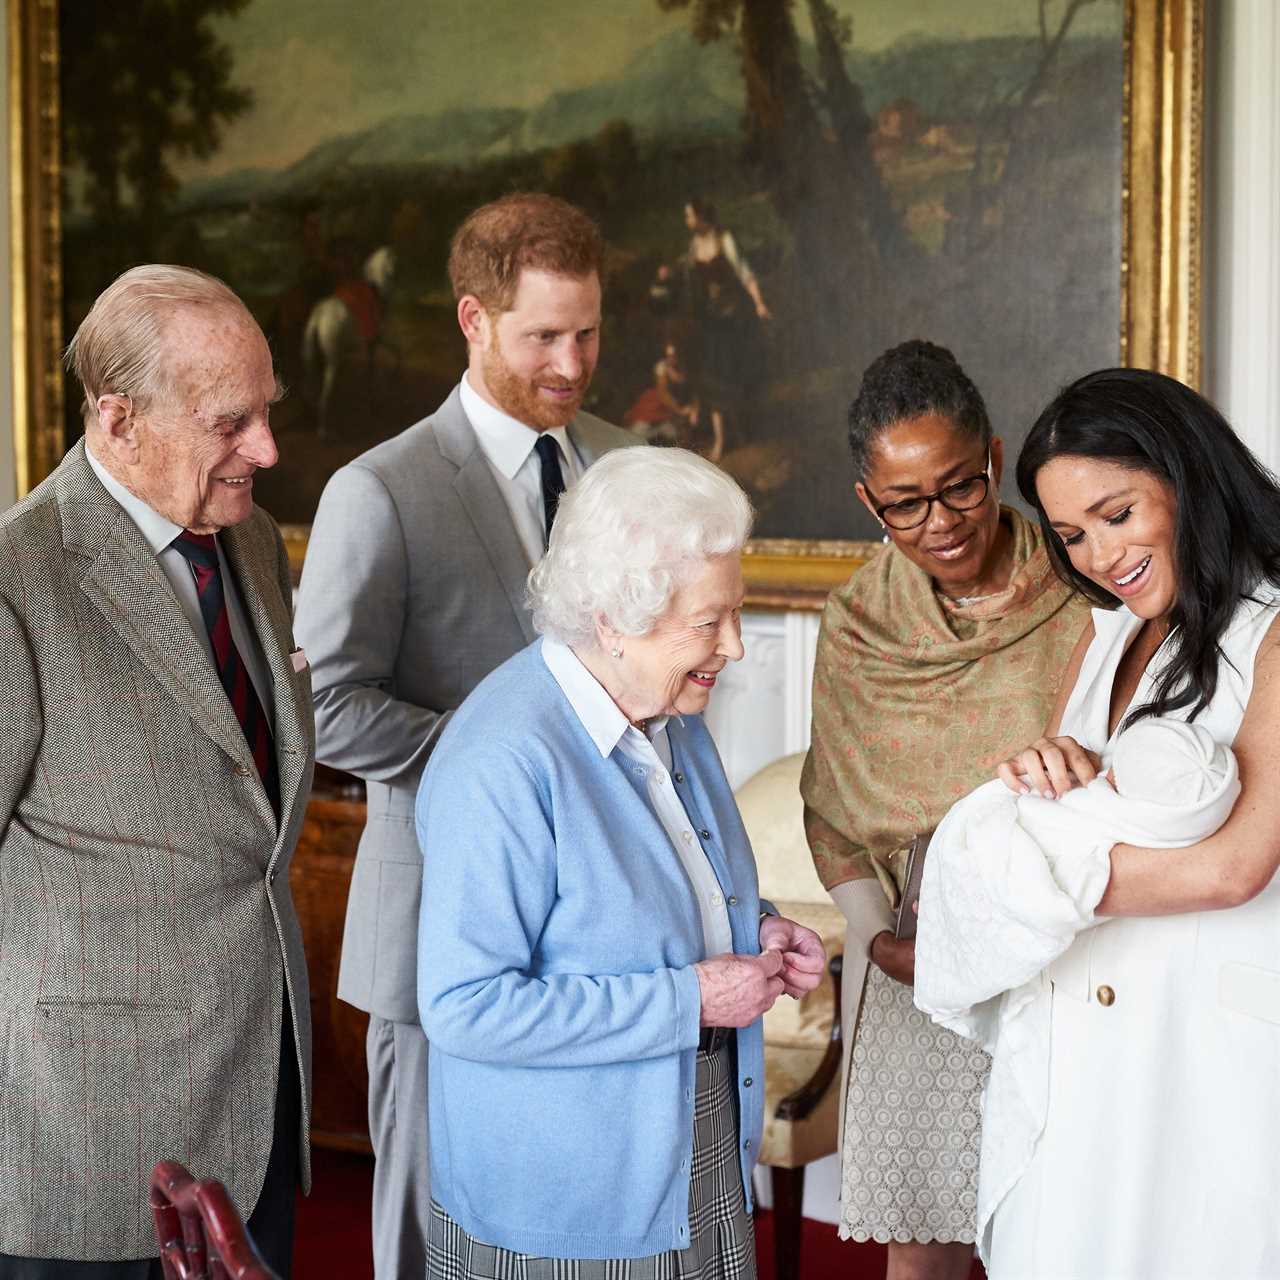 The Queen has suffered "sadness" over "barely seeing Archie"